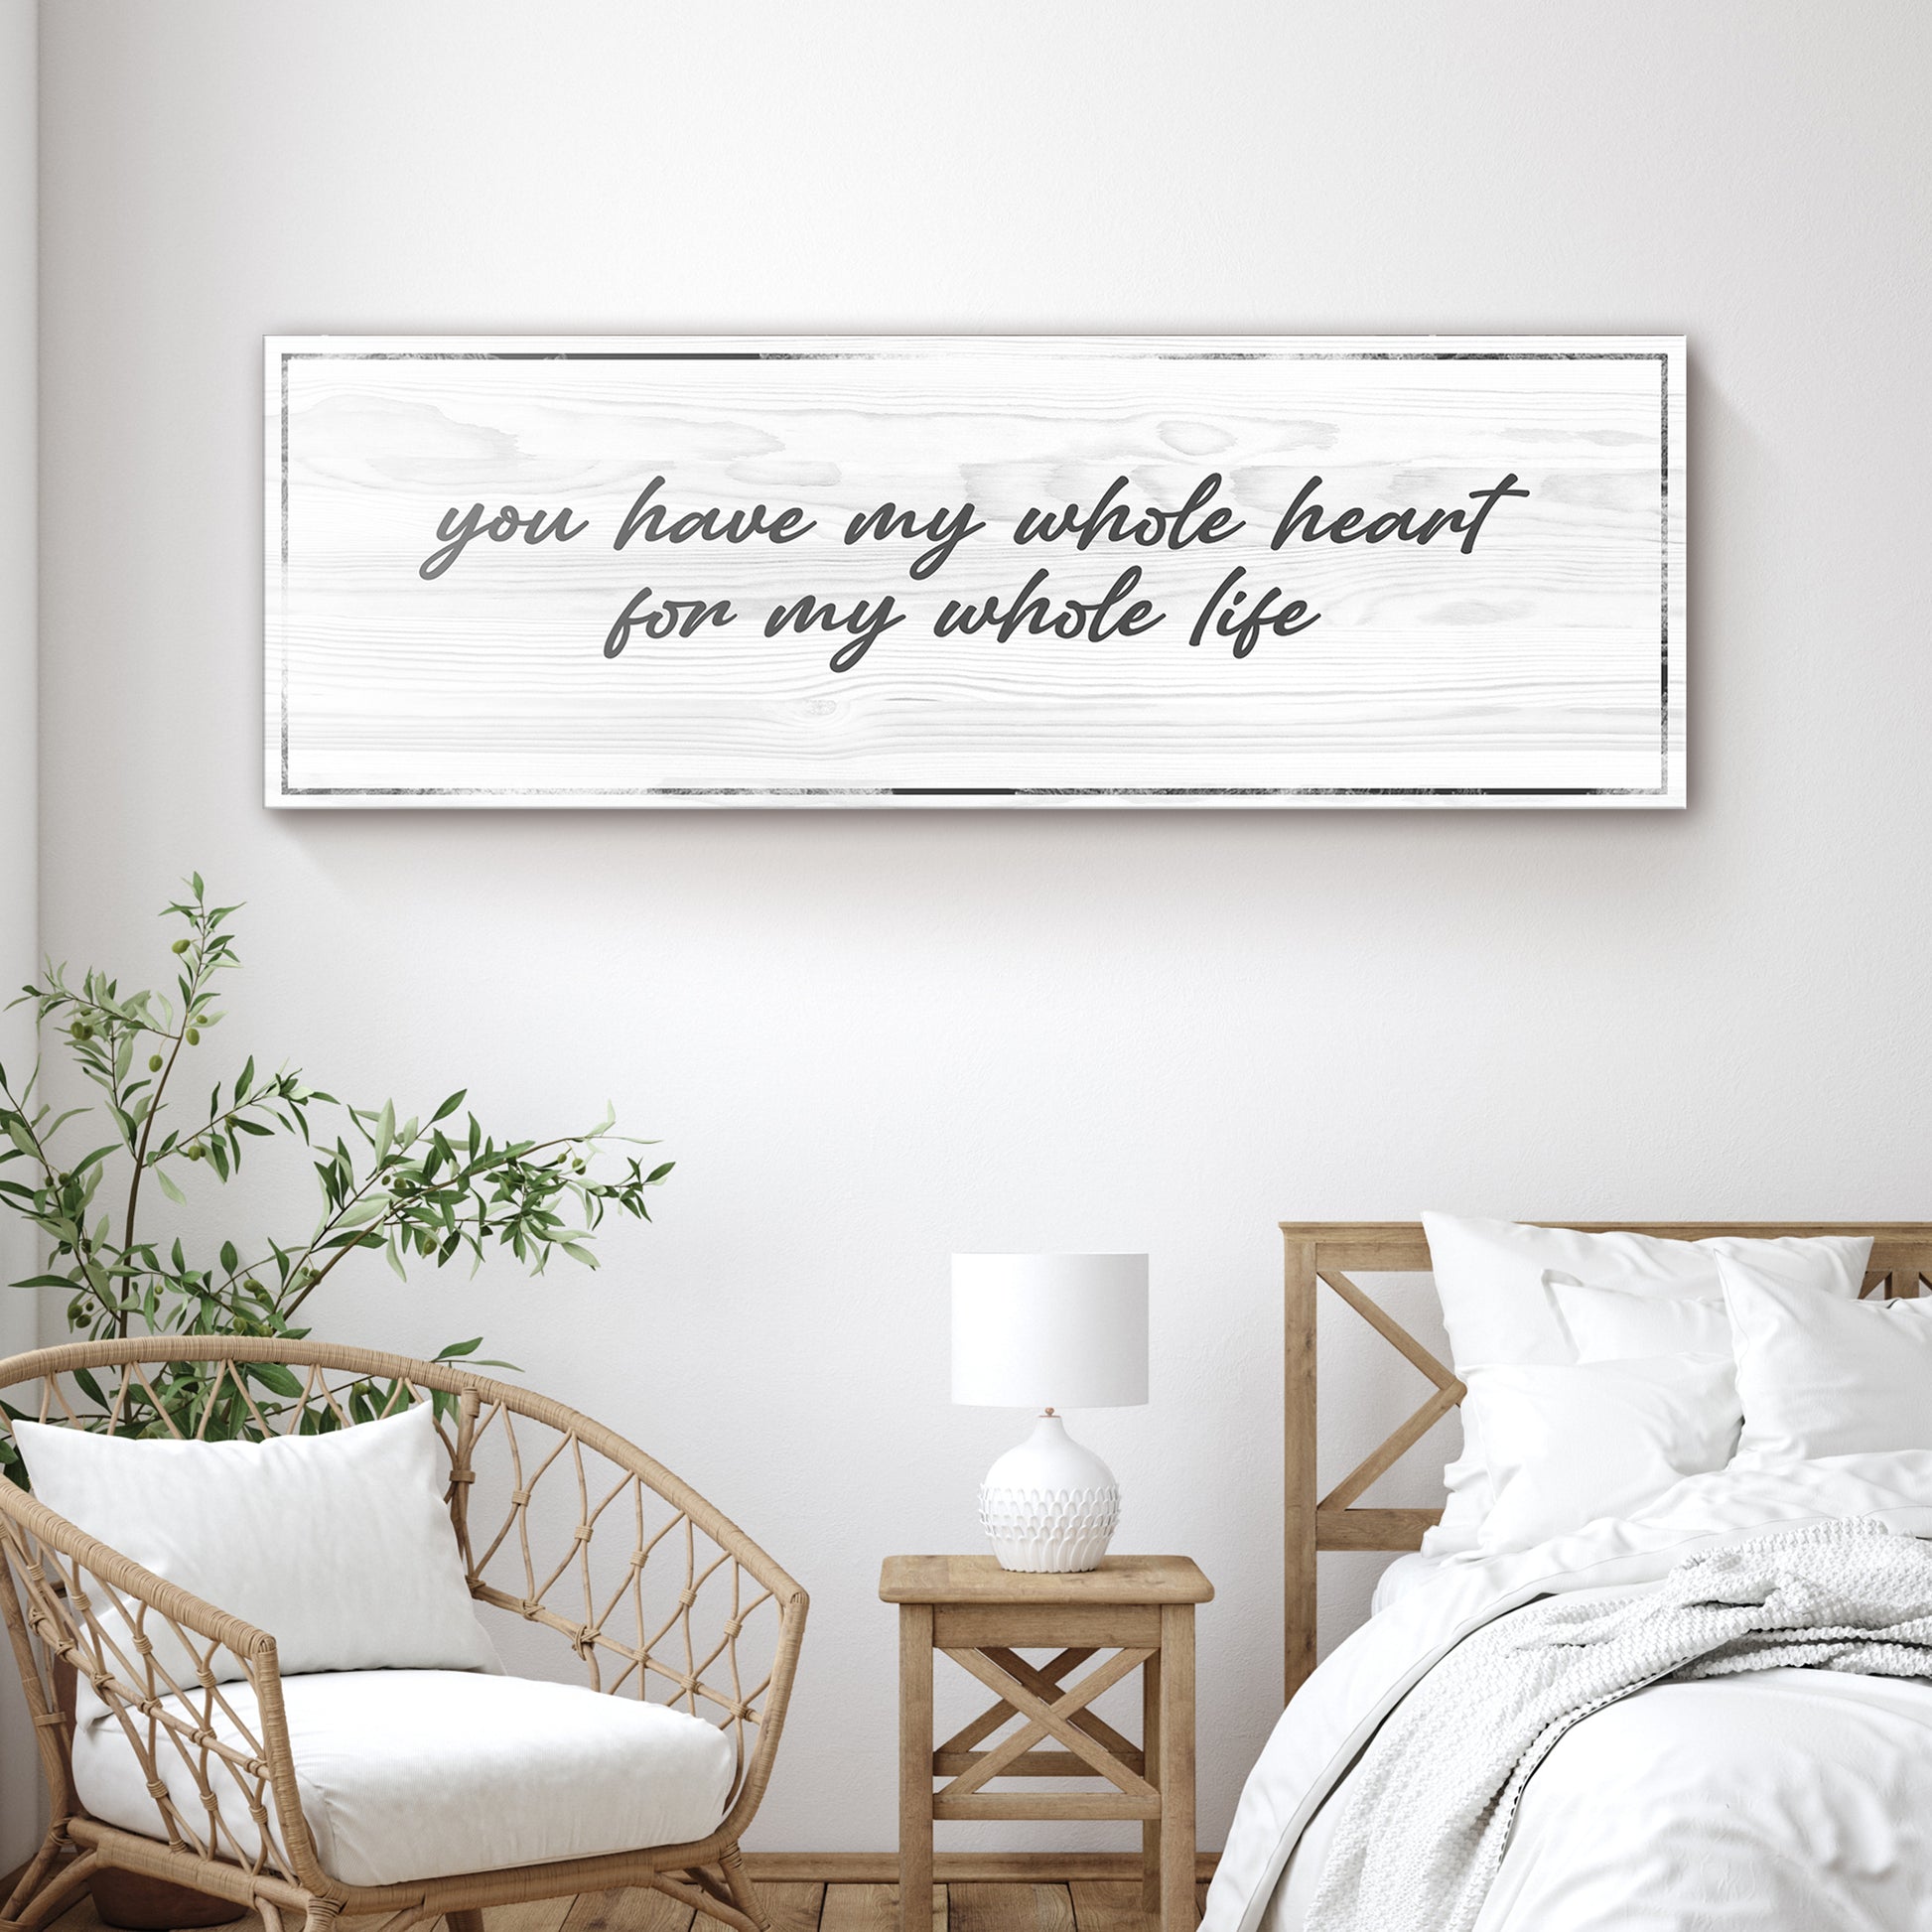 You have my whole heart for my whole life Sign II - Image by Tailored Canvases